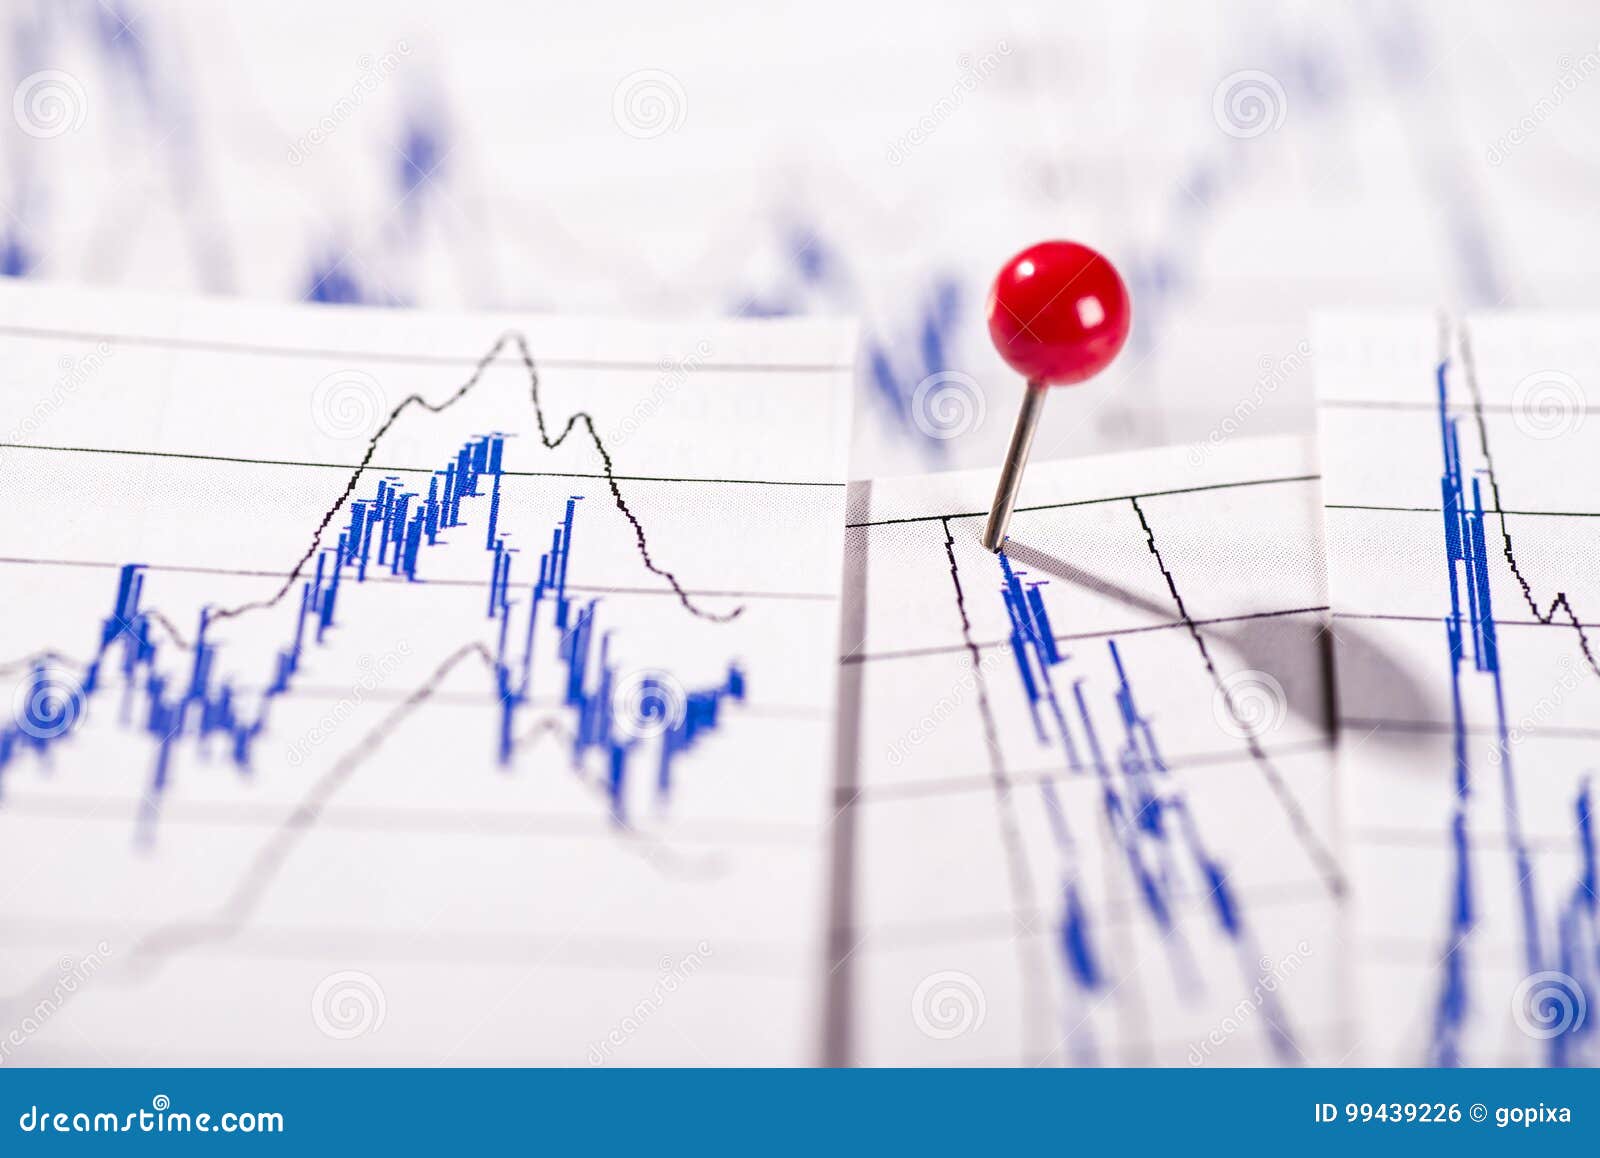 Stock Prices And Charts